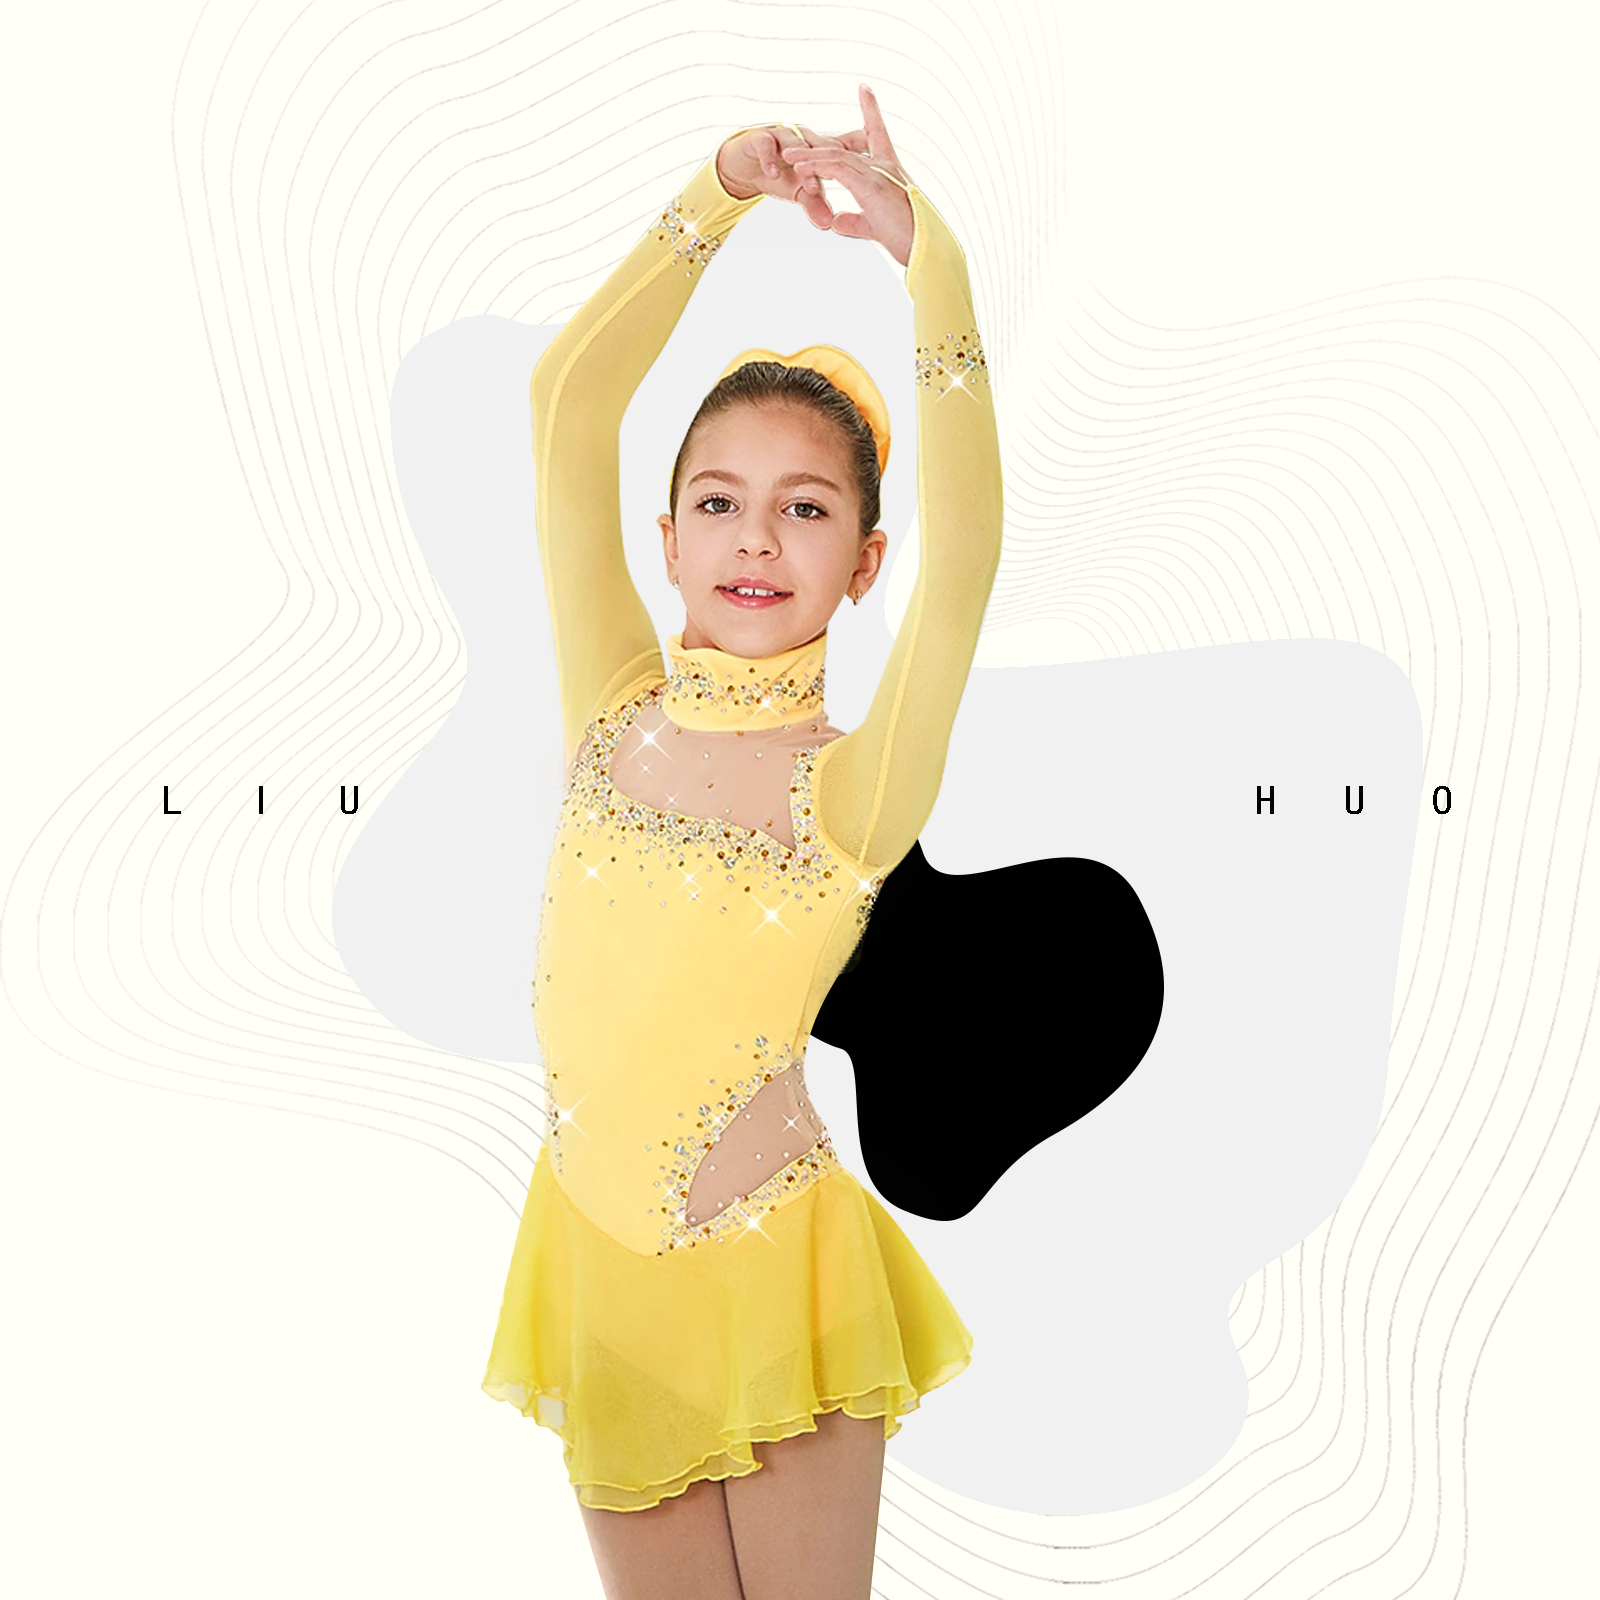 LIUHUO Ice Skating Dress Girls and Women Pink Handmade Figure Skating Professional Competition Costume Long Sleeved Dress 